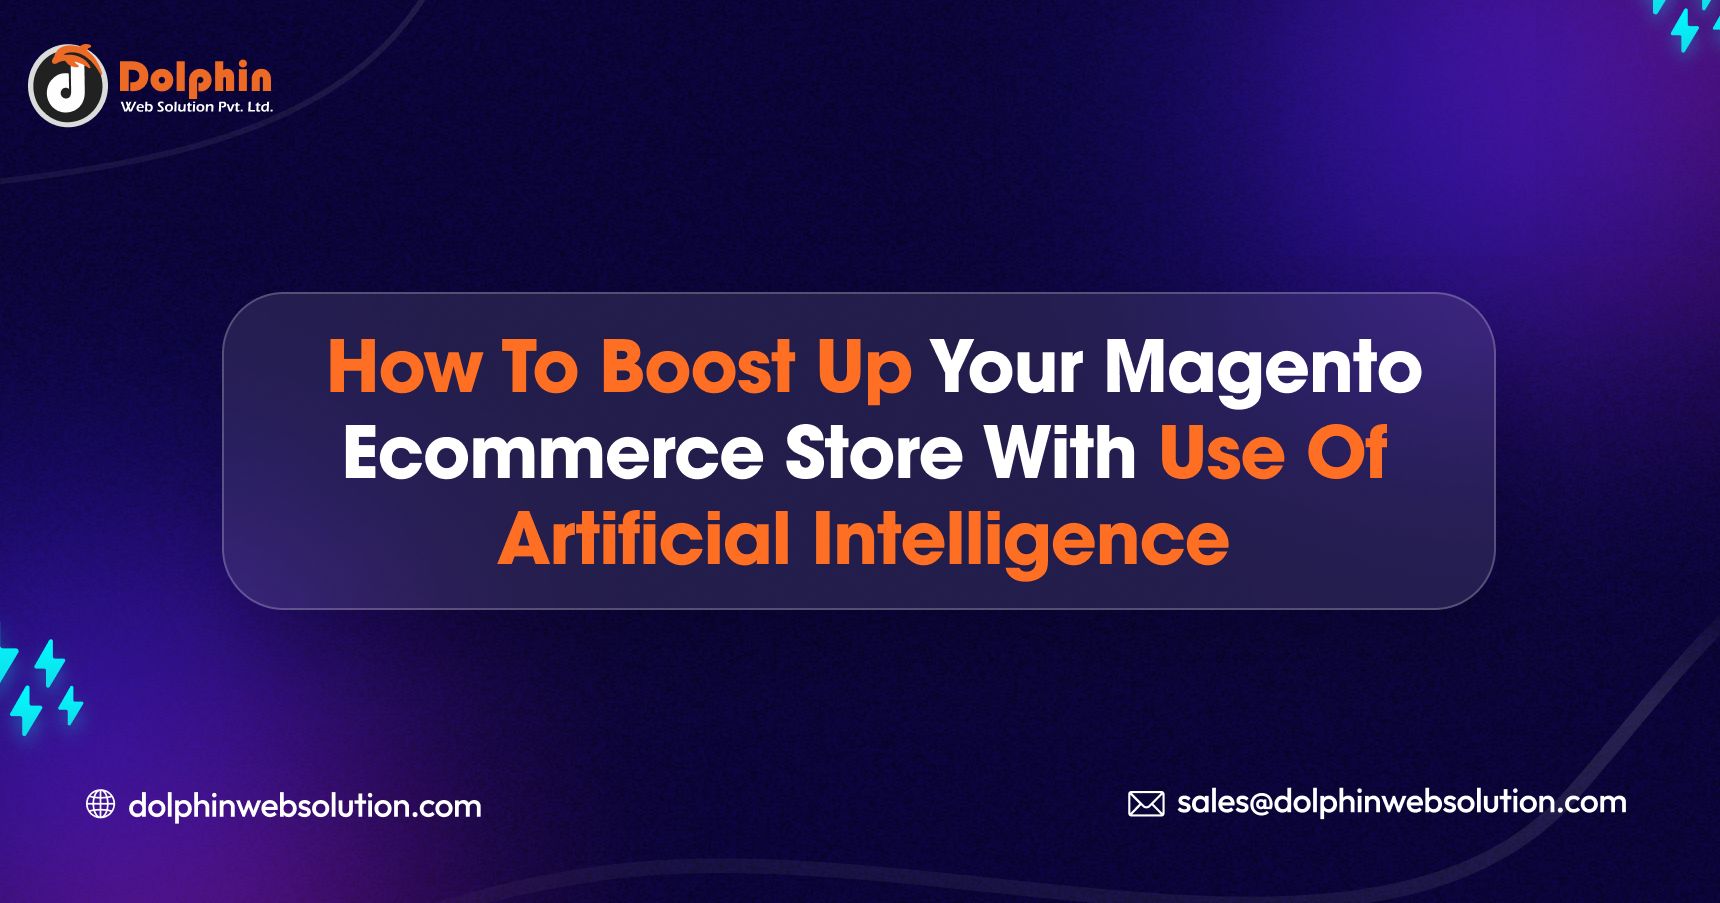 How to Boost Up your Magento Ecommerce Store with Use of Artificial Intelligence